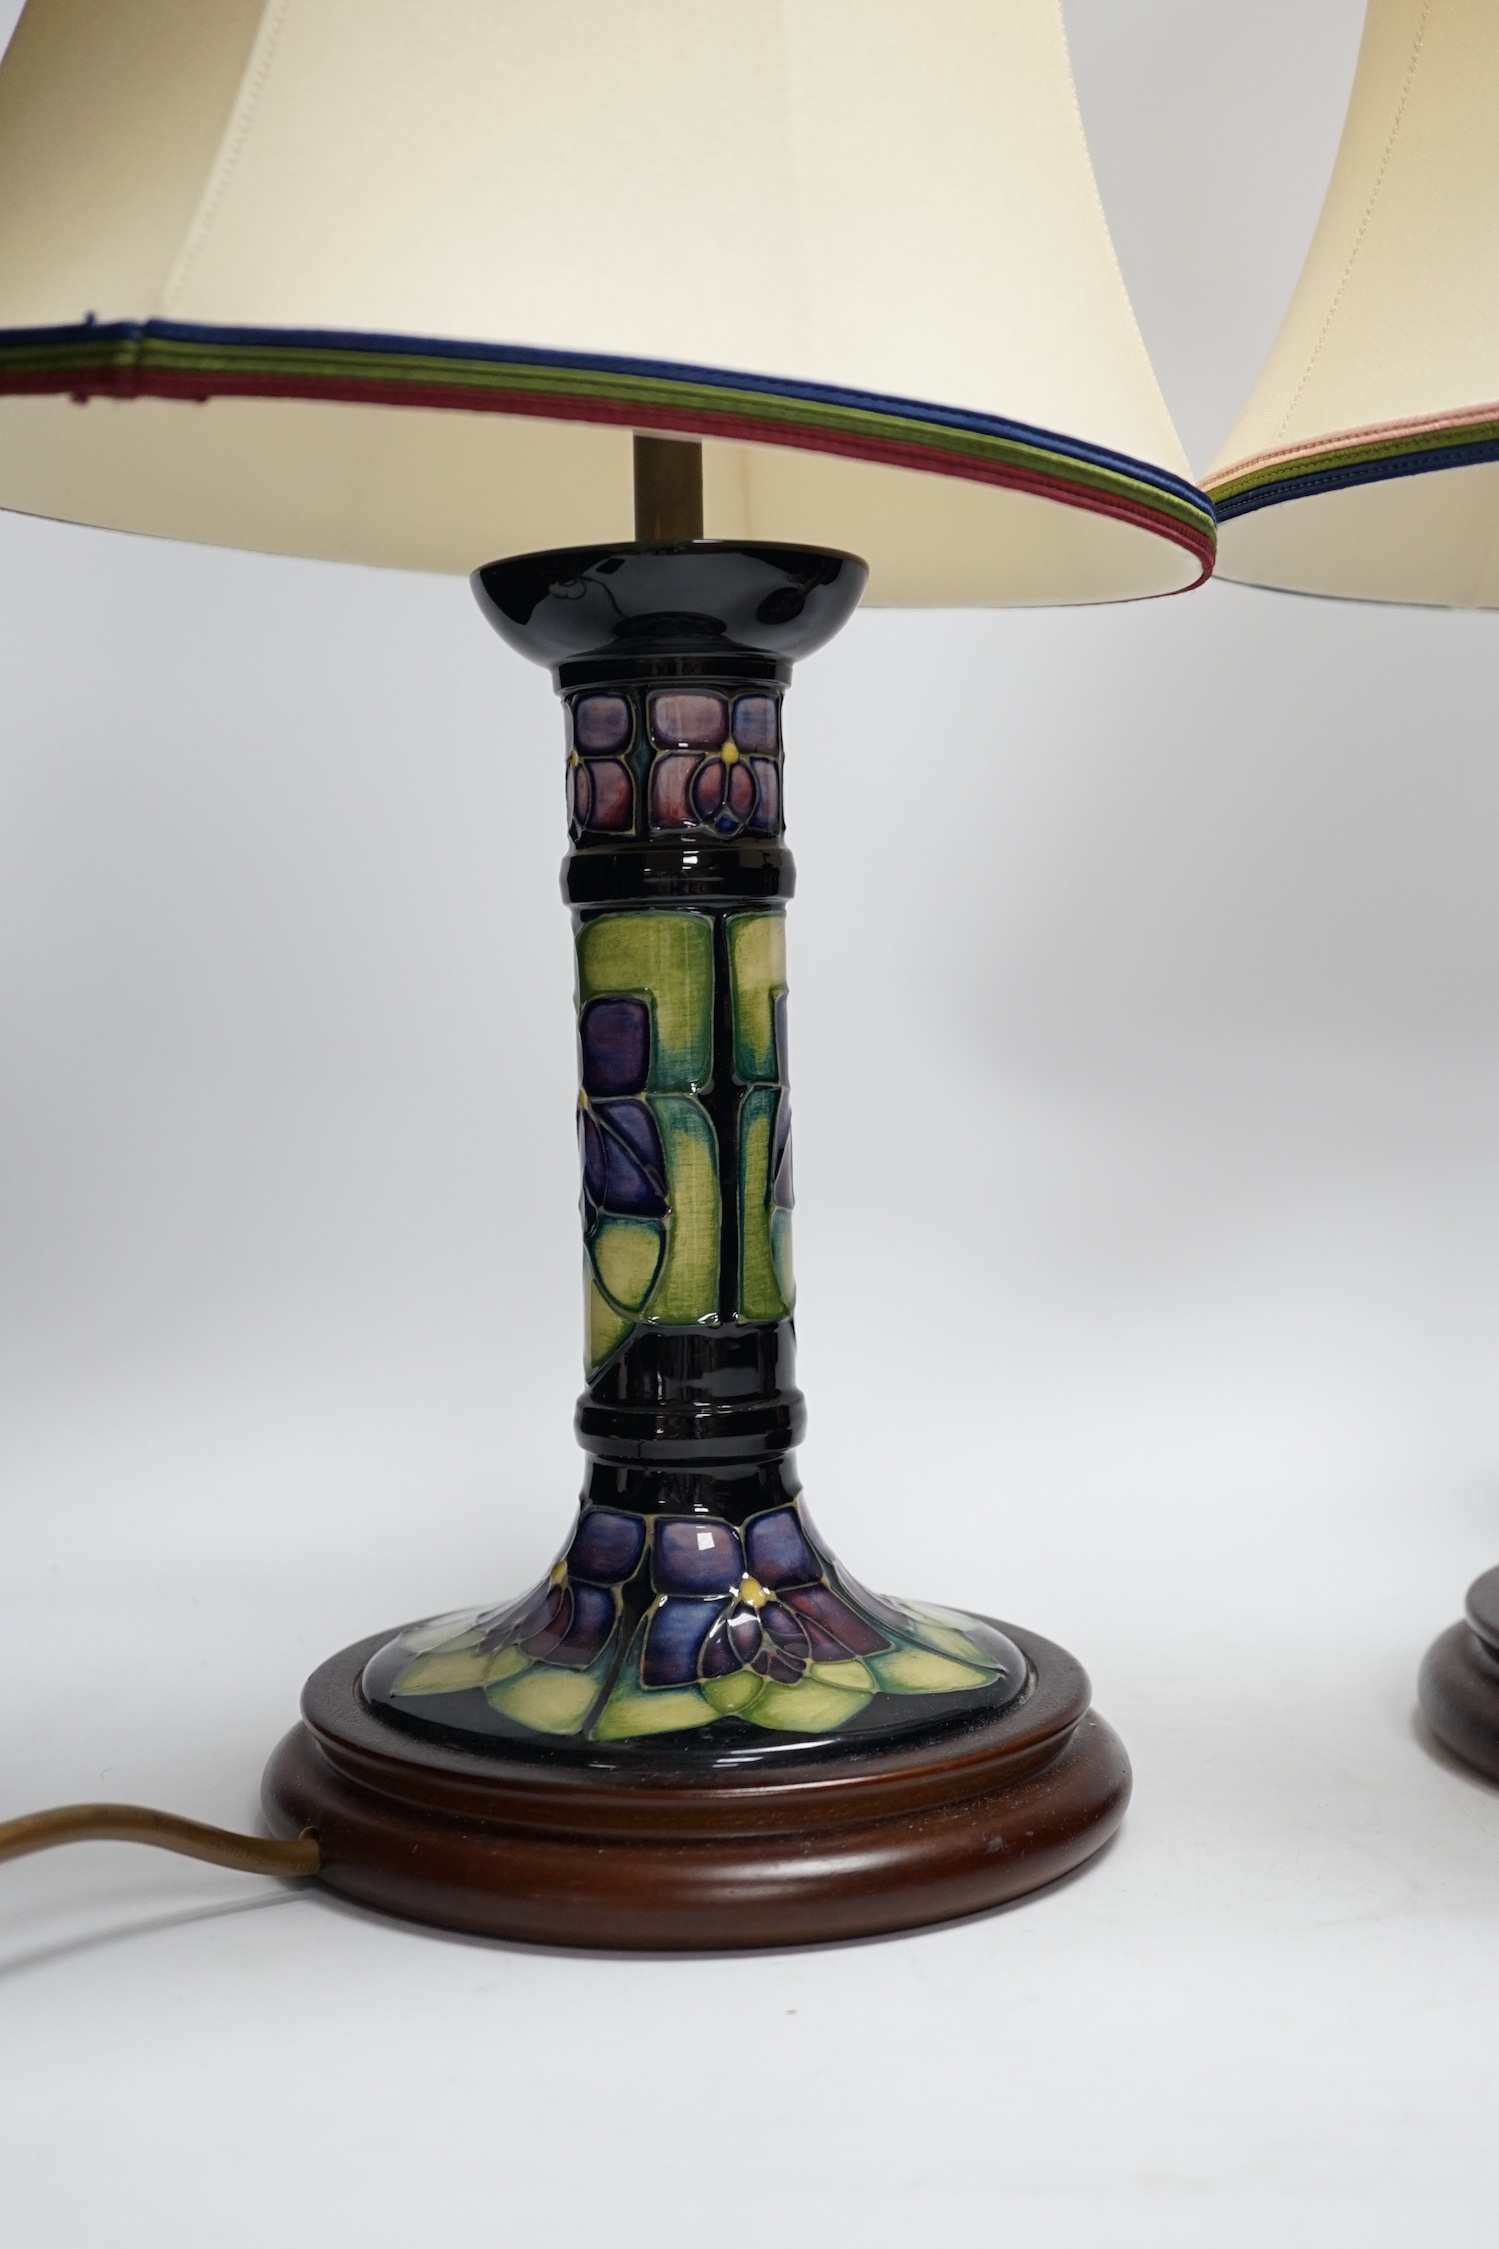 Two Moorcroft lamp bases, in Oberon and Violet patterns, 47cm high